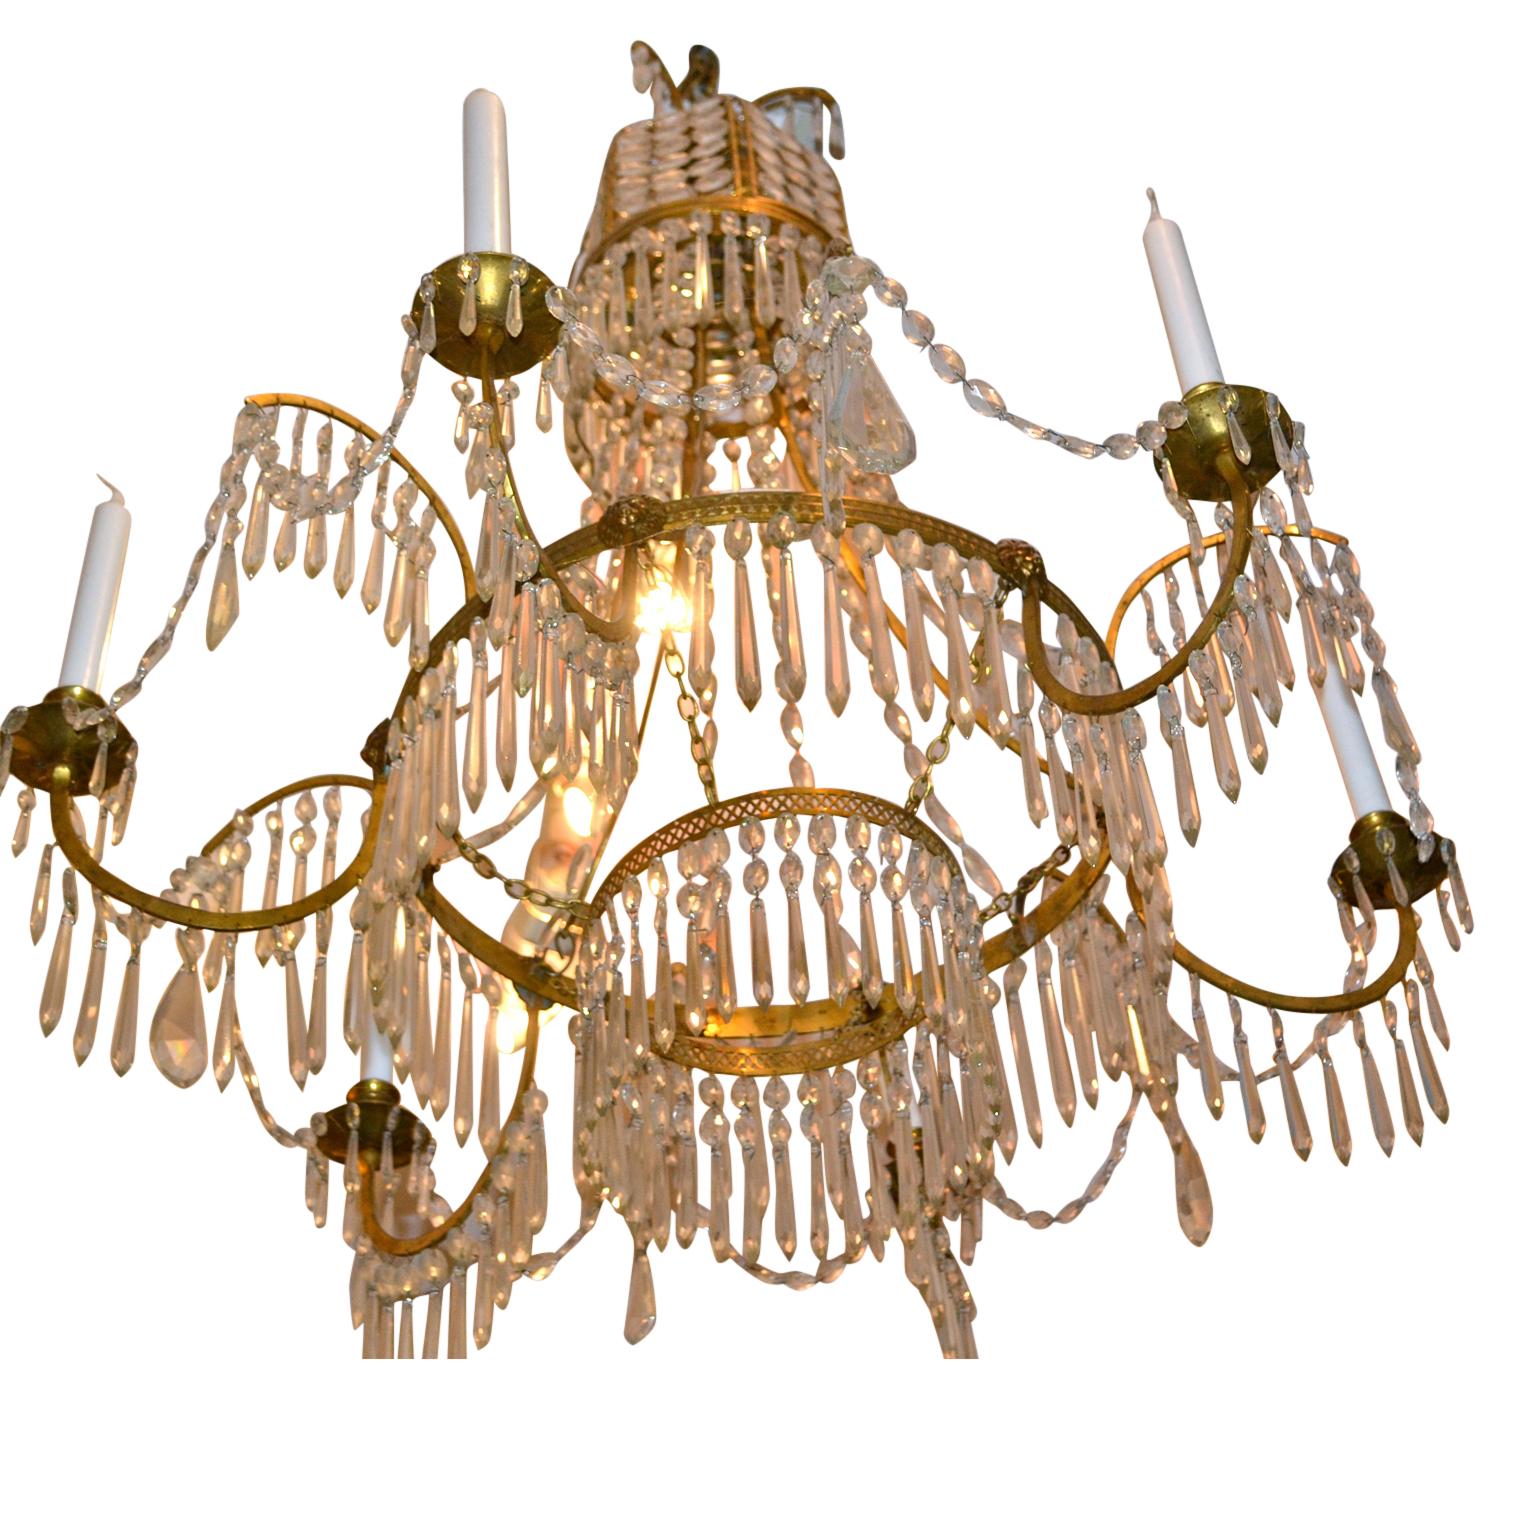 Swedish 19 Century Baltic Empire Style Crystal and Gilt Bronze Chandelier